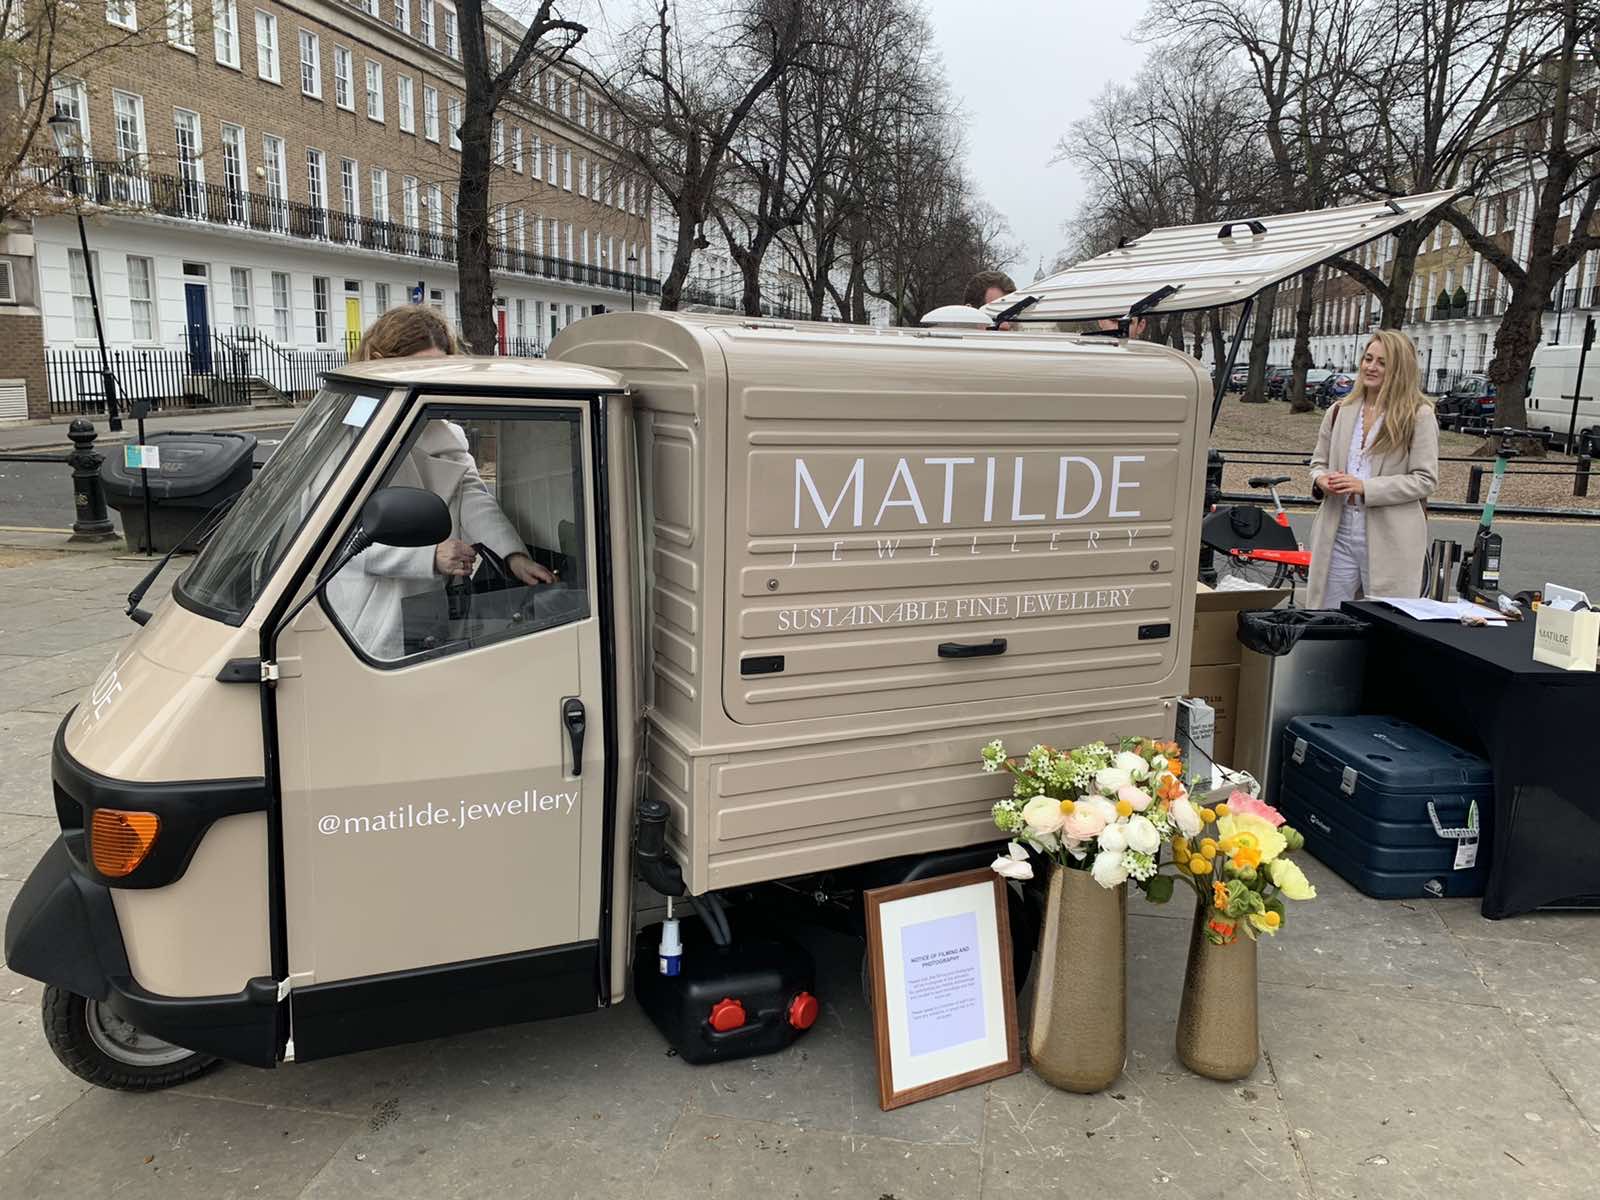 The Mobile Coffee Bean Matilde jewellery branded coffee van outdoor promotional event